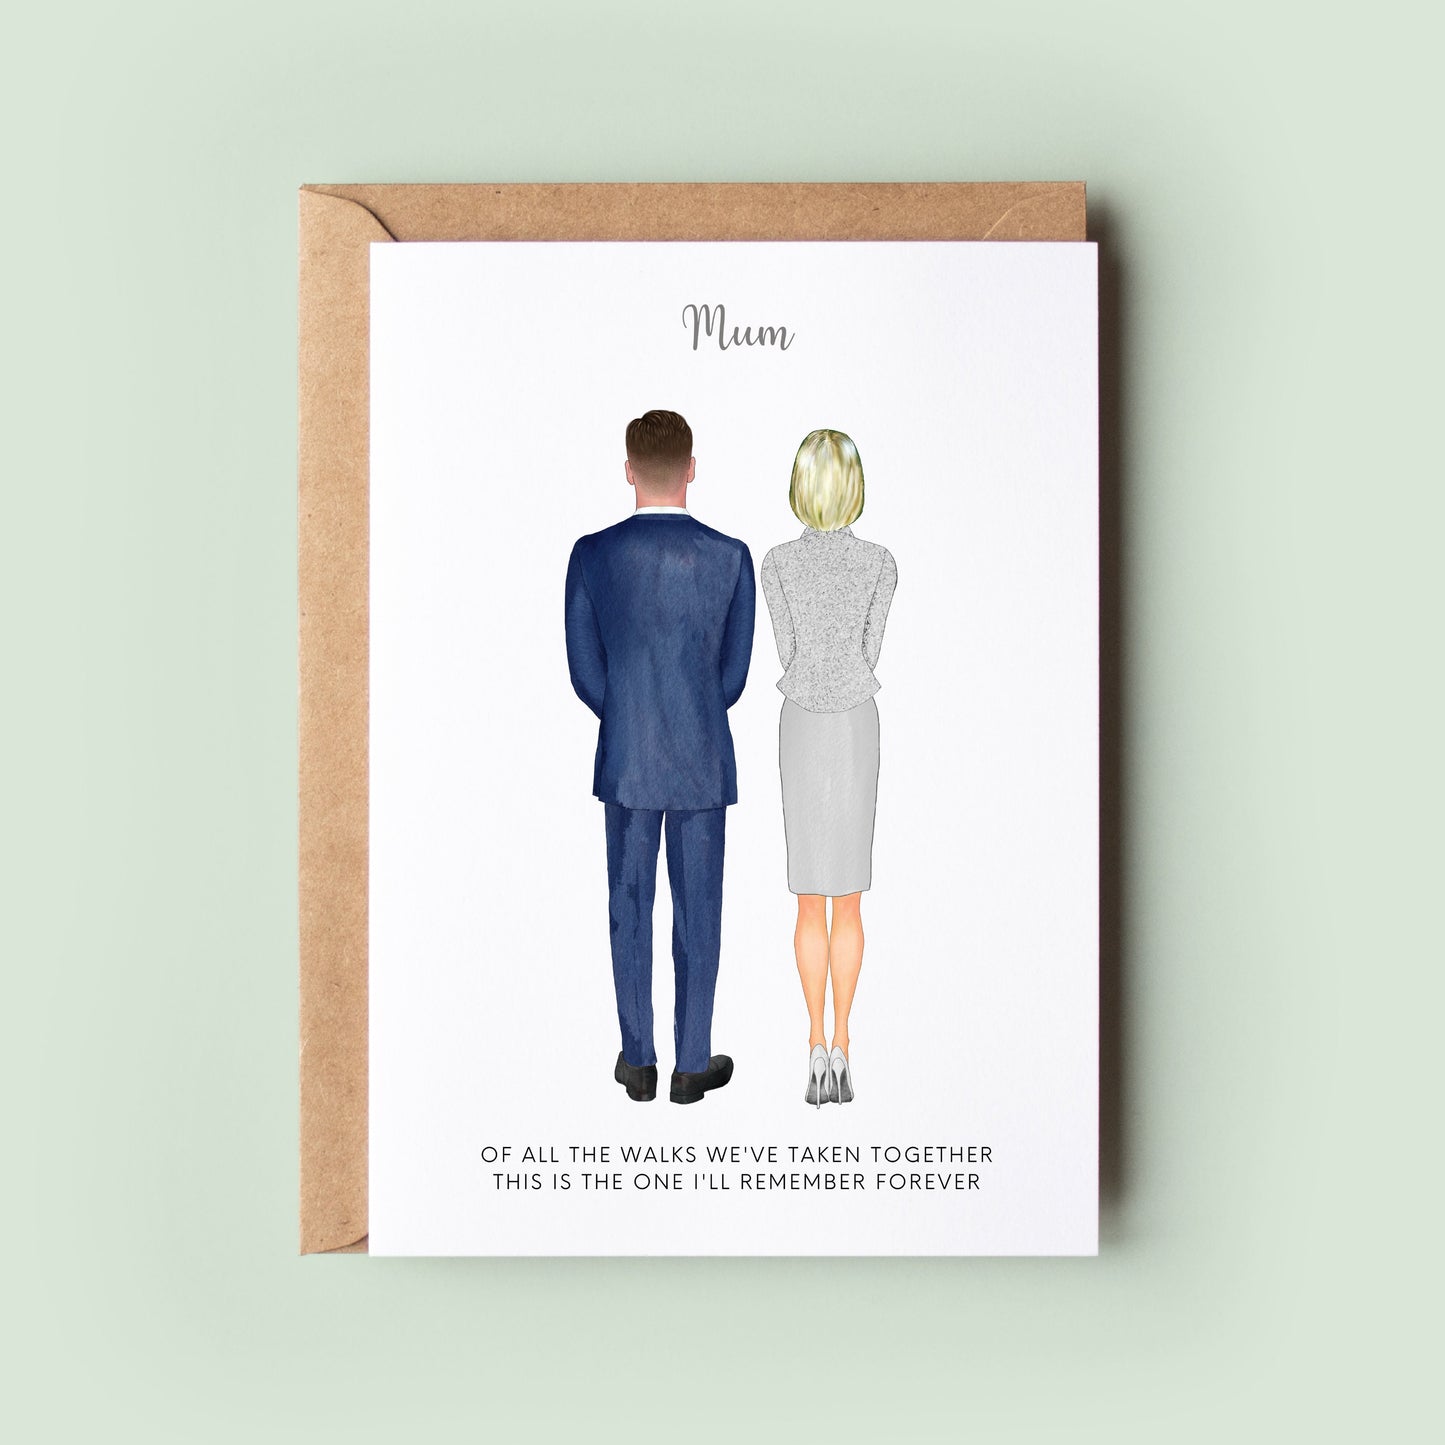 Personalised Wedding Card, Mum & Son, Mother of the Groom, Wedding Thank You Card, Mum Card, Groom Card, In Laws Card, Mother of the Bride